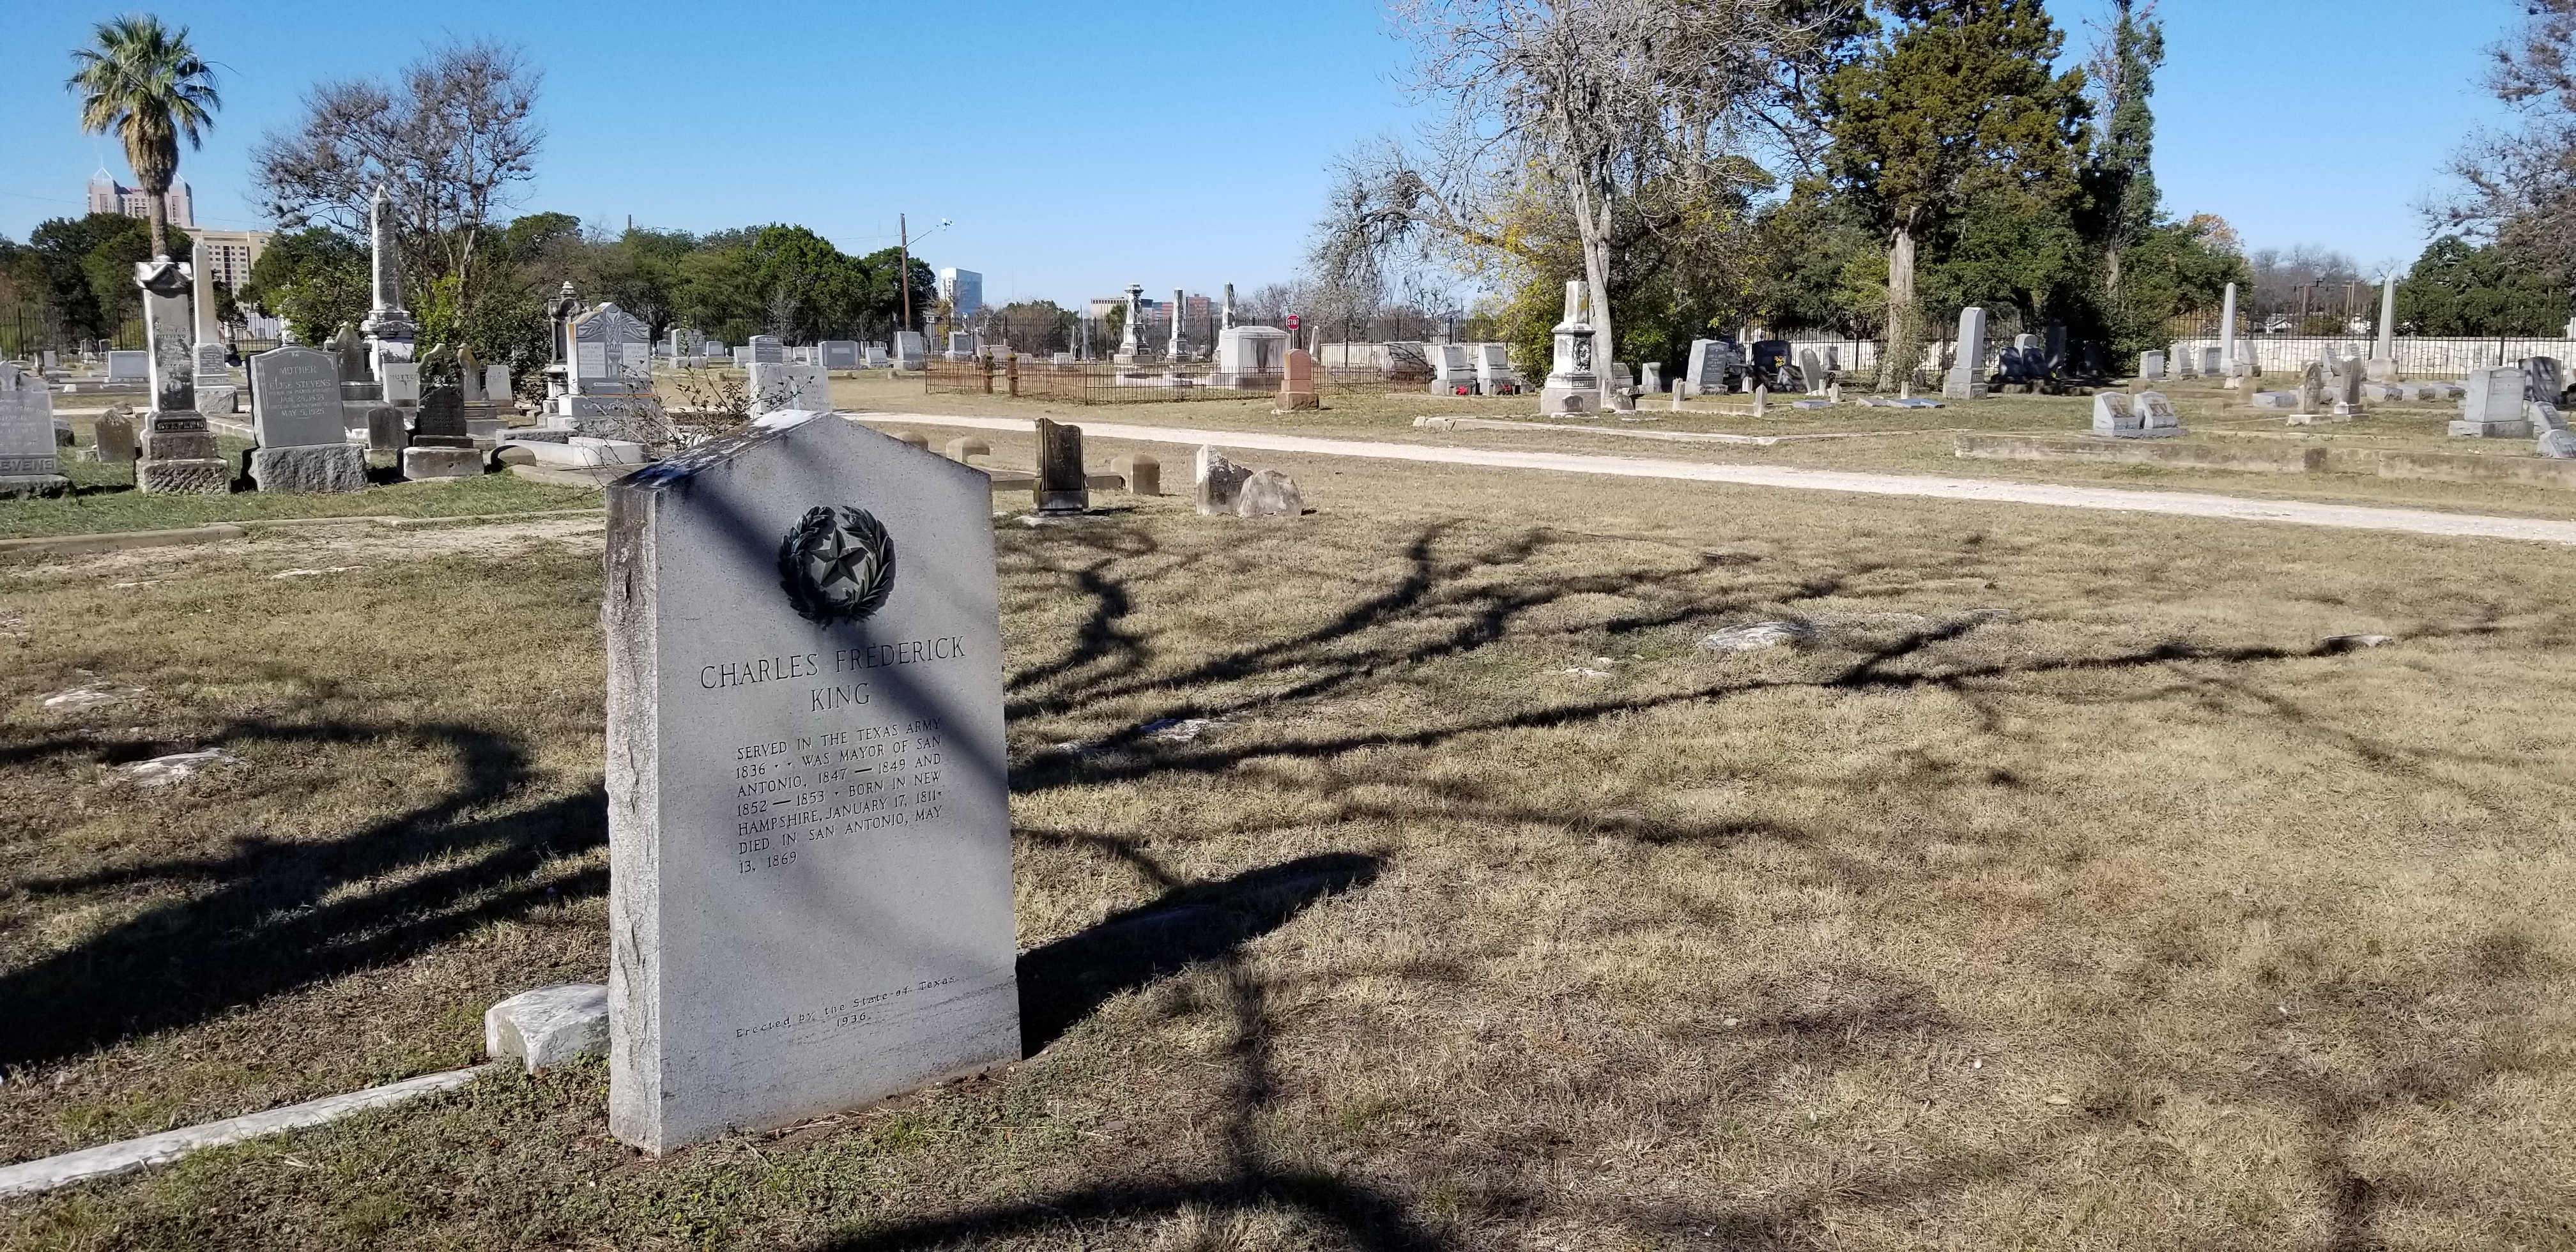 The view of the Charles Frederick King Marker in the cemetery